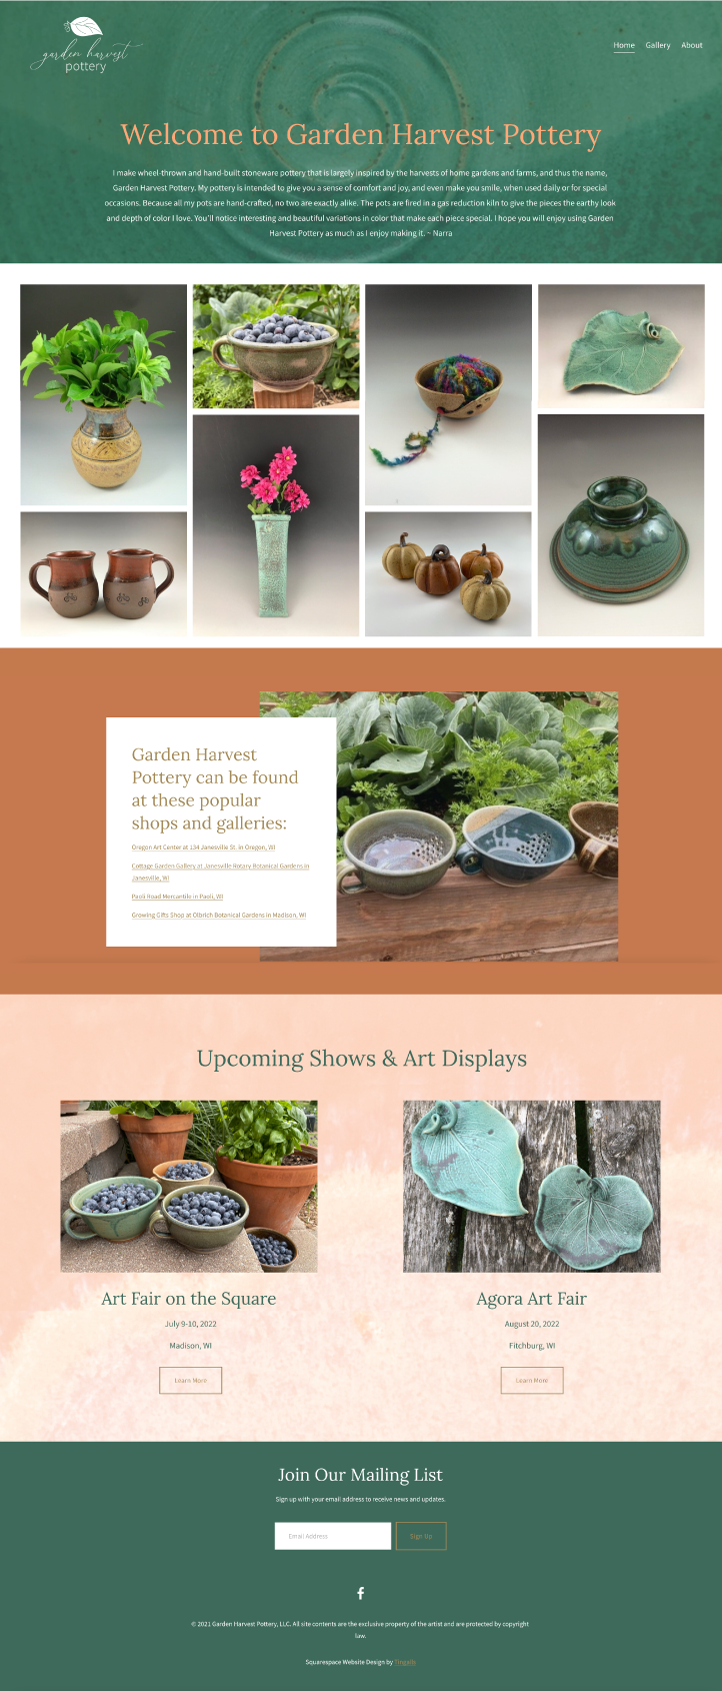 An image of the homepage of Garden Harvest Pottery.